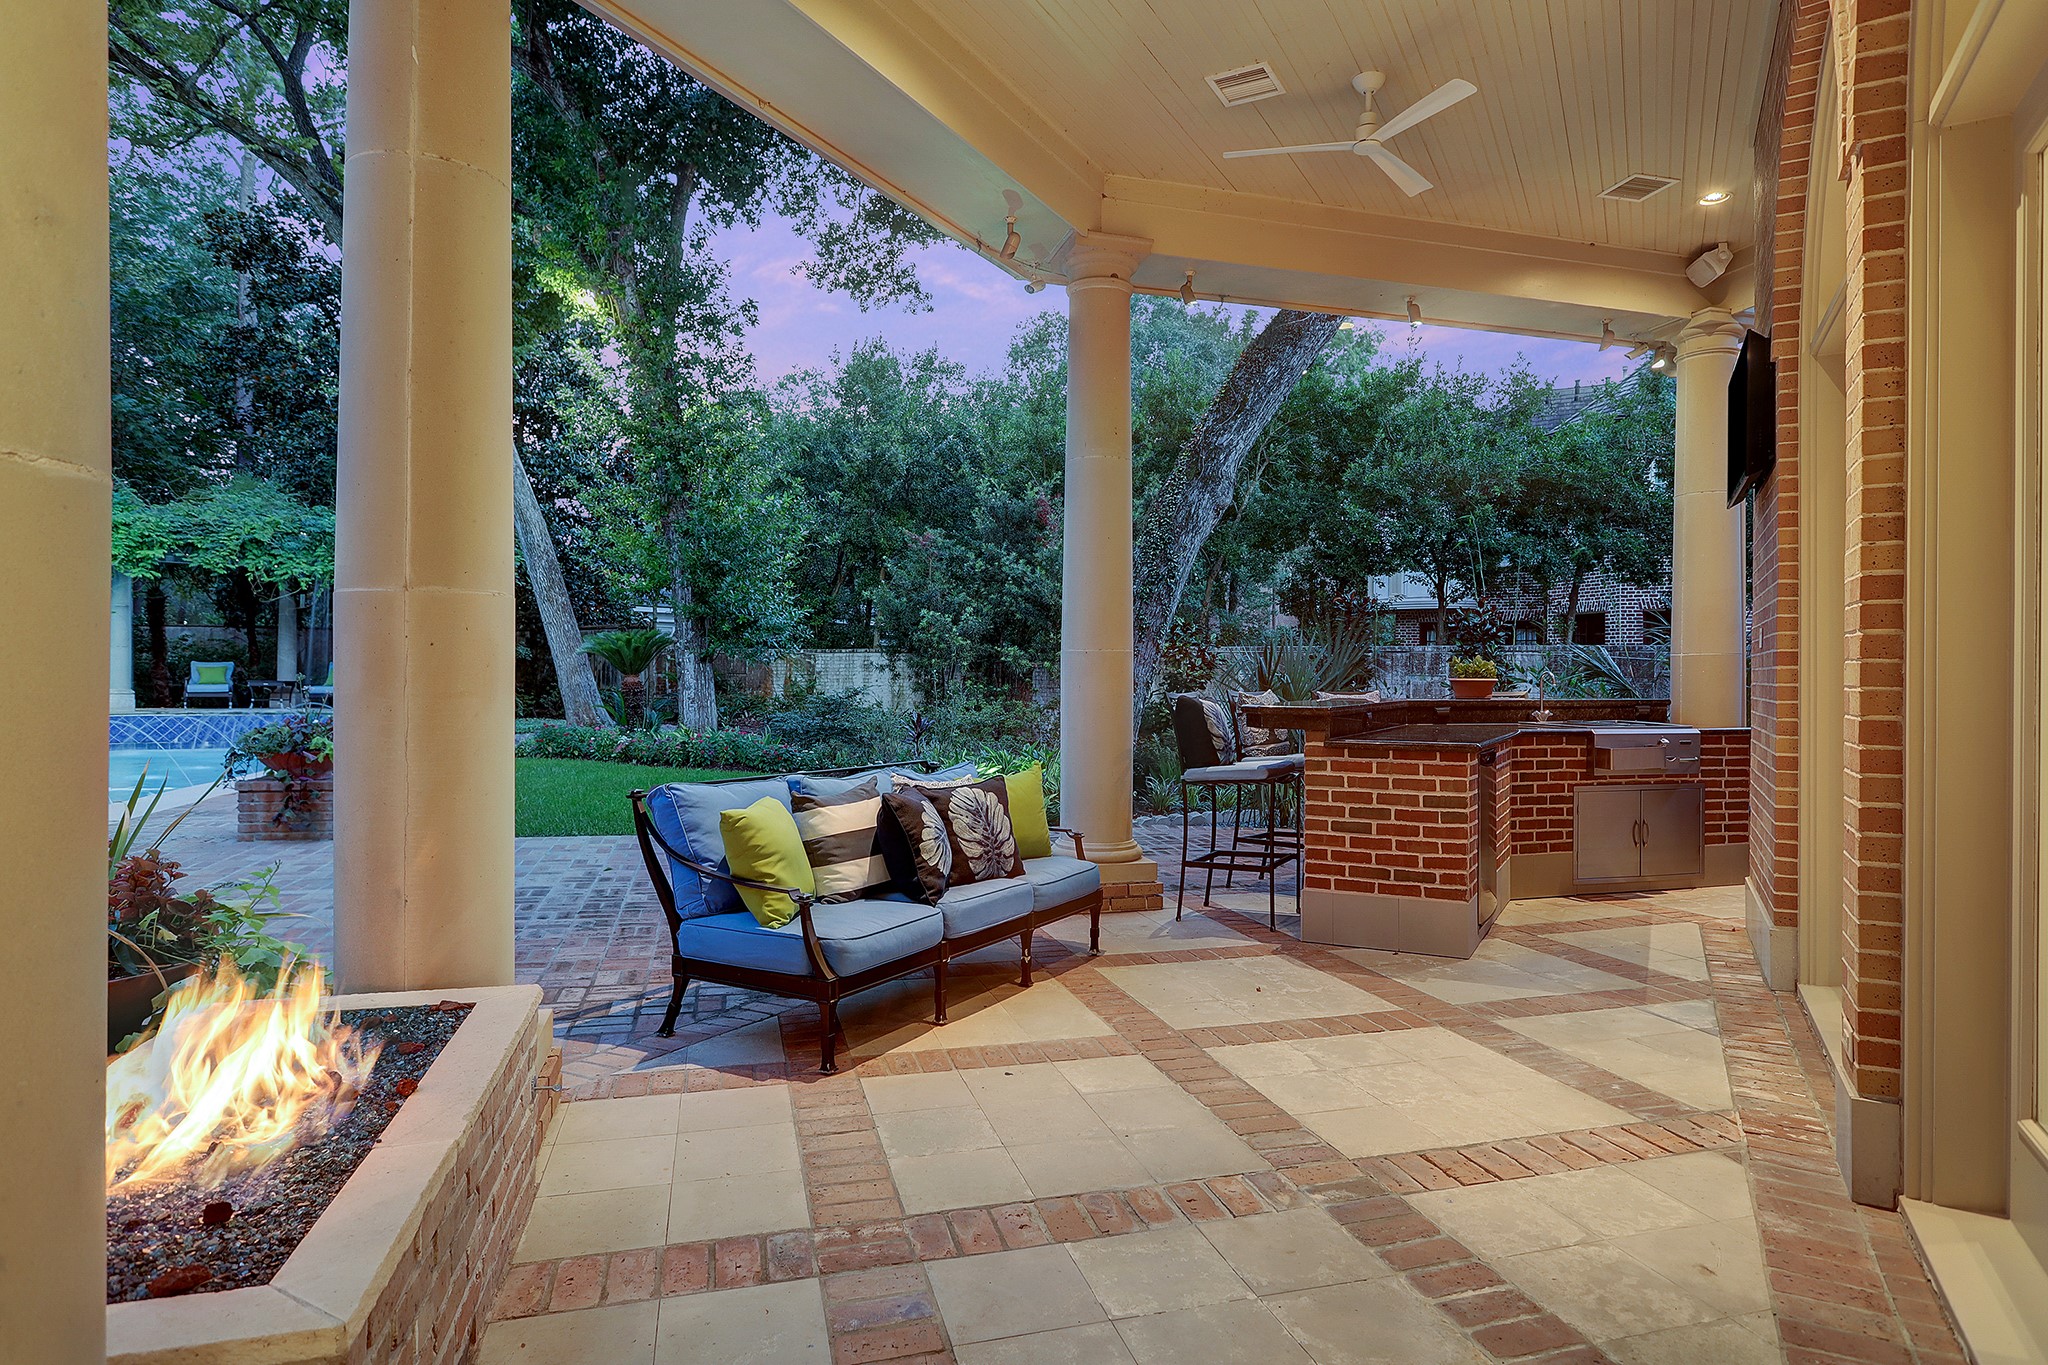 Covered outdoor living area with gas fire feature.